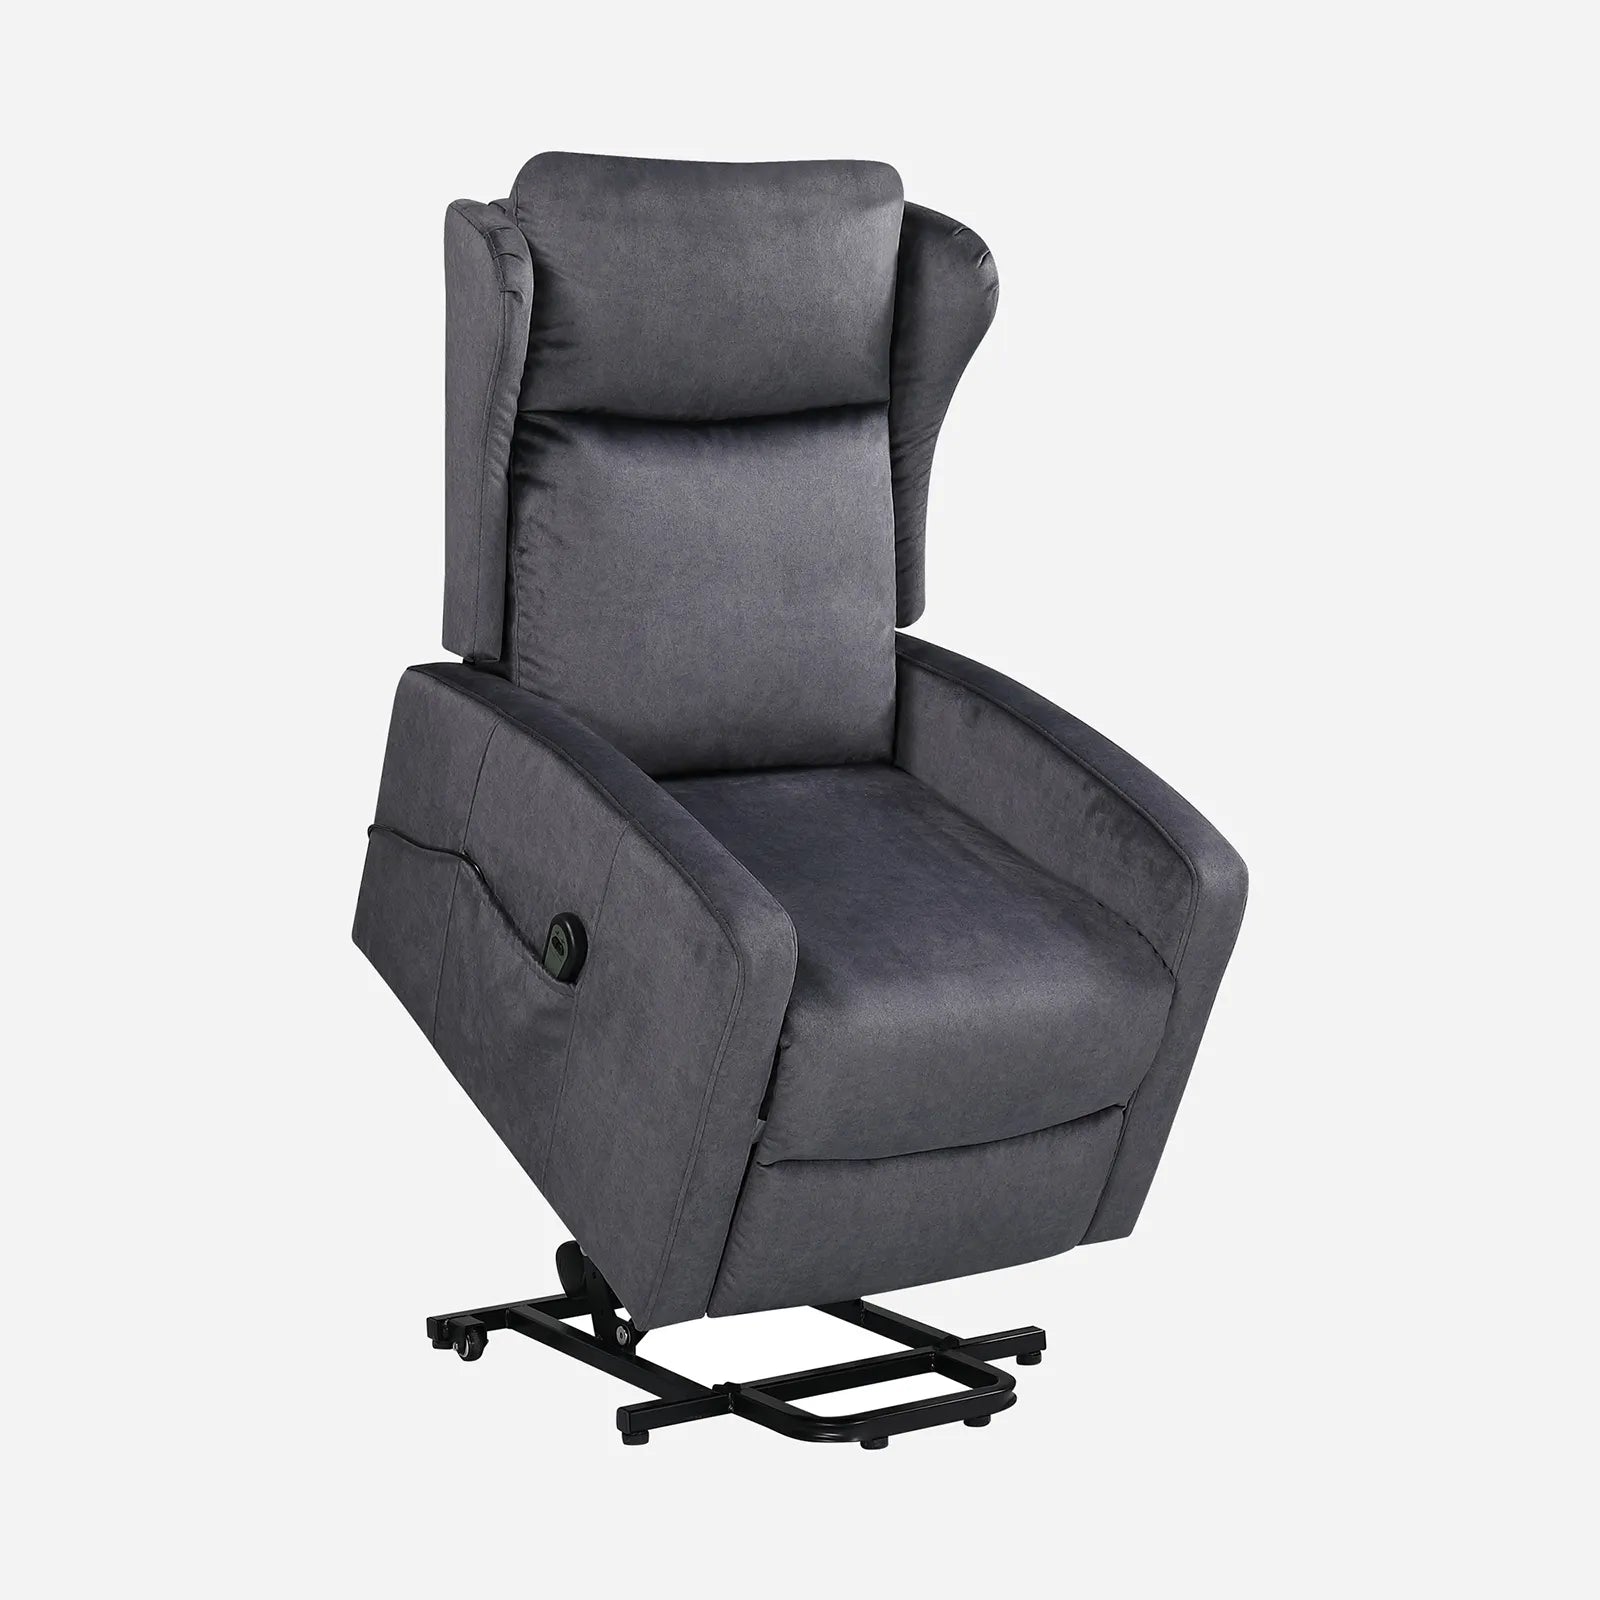 lift recliner chair that helps you stand up